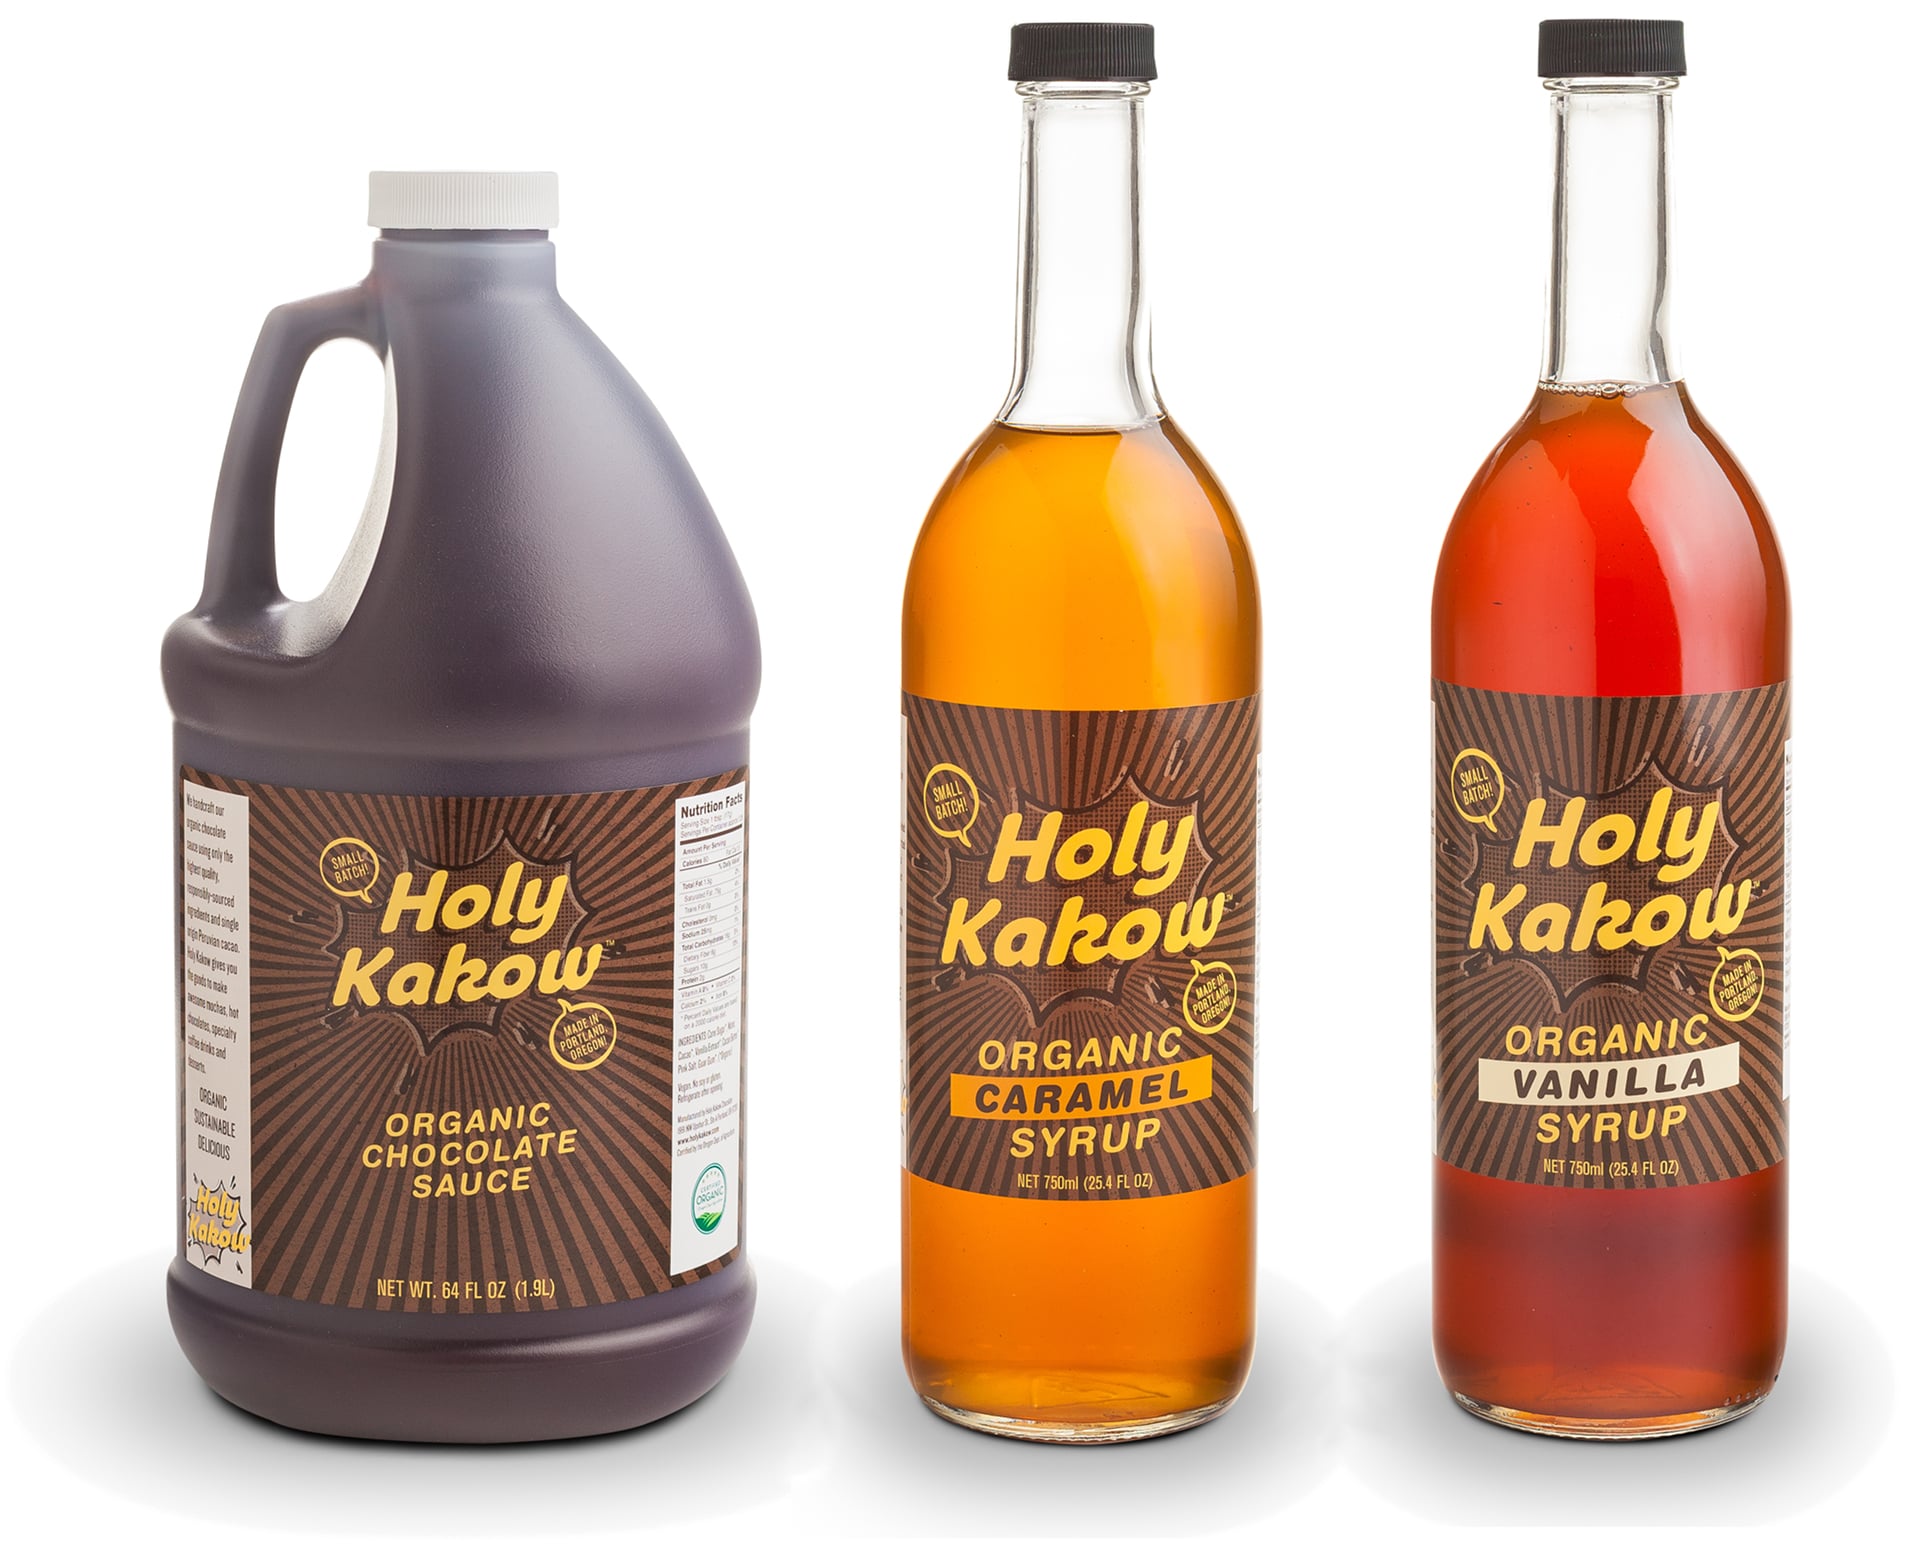 Holy Cakow delicious all natural organic flavored syrups